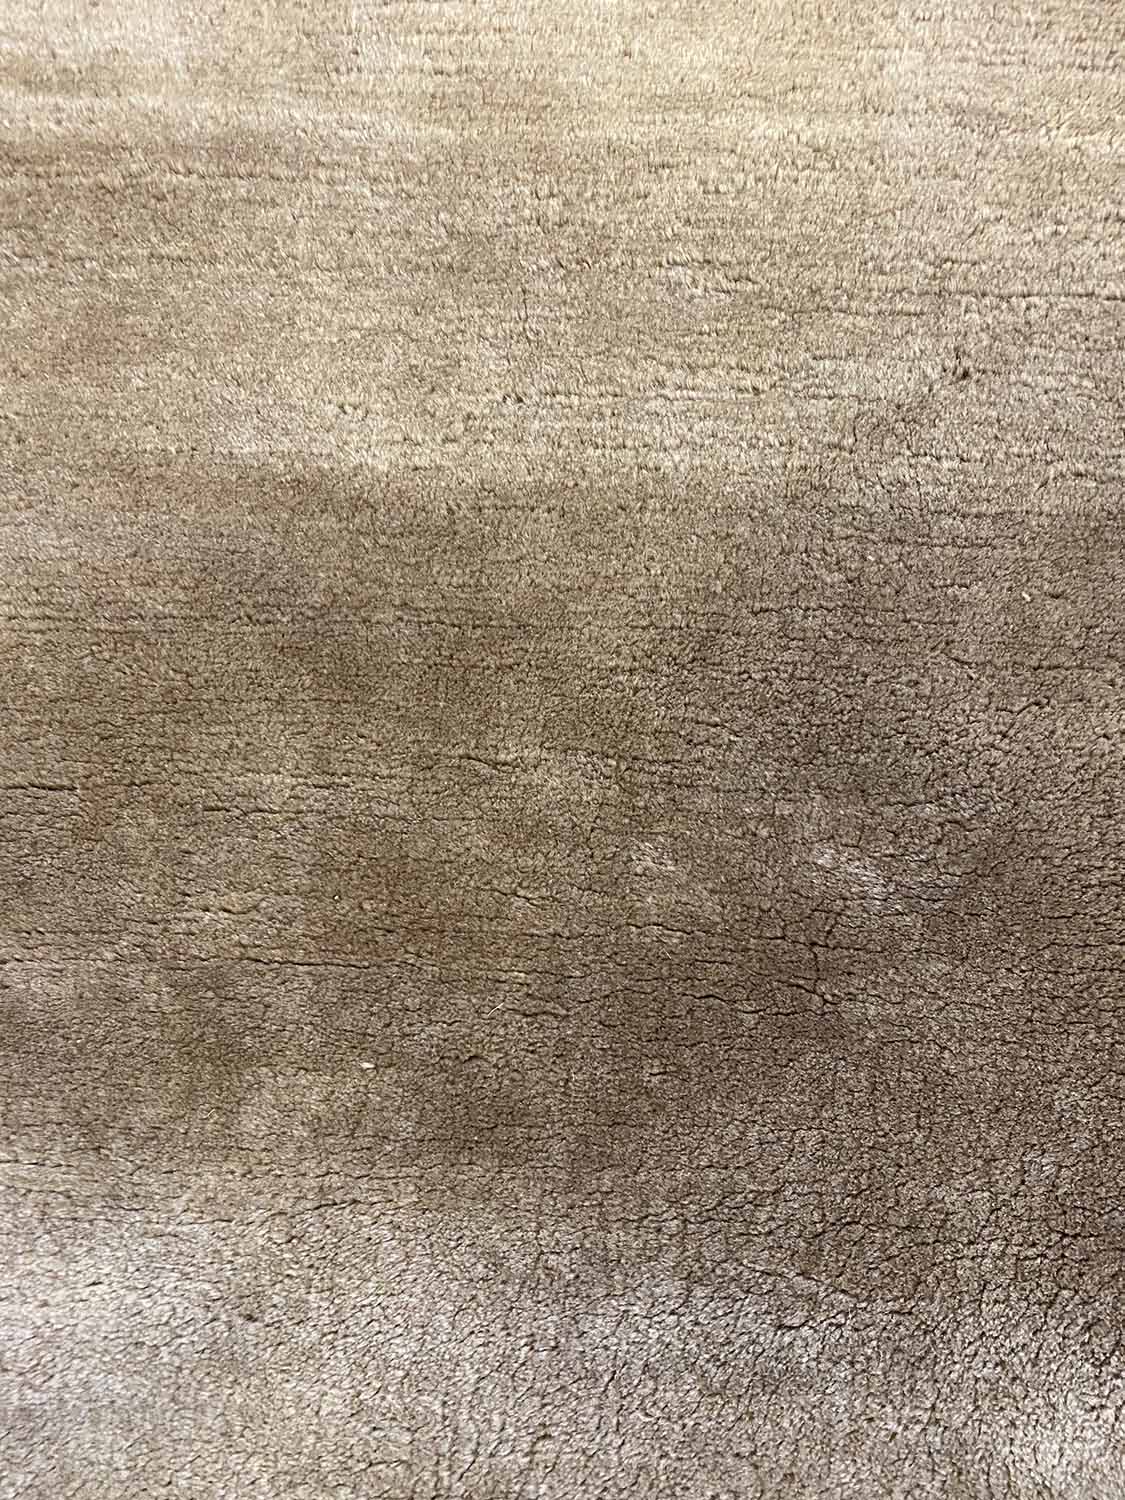 THE RUG COMPANY, 240cm x 215cm, mohair collection. - Image 2 of 3